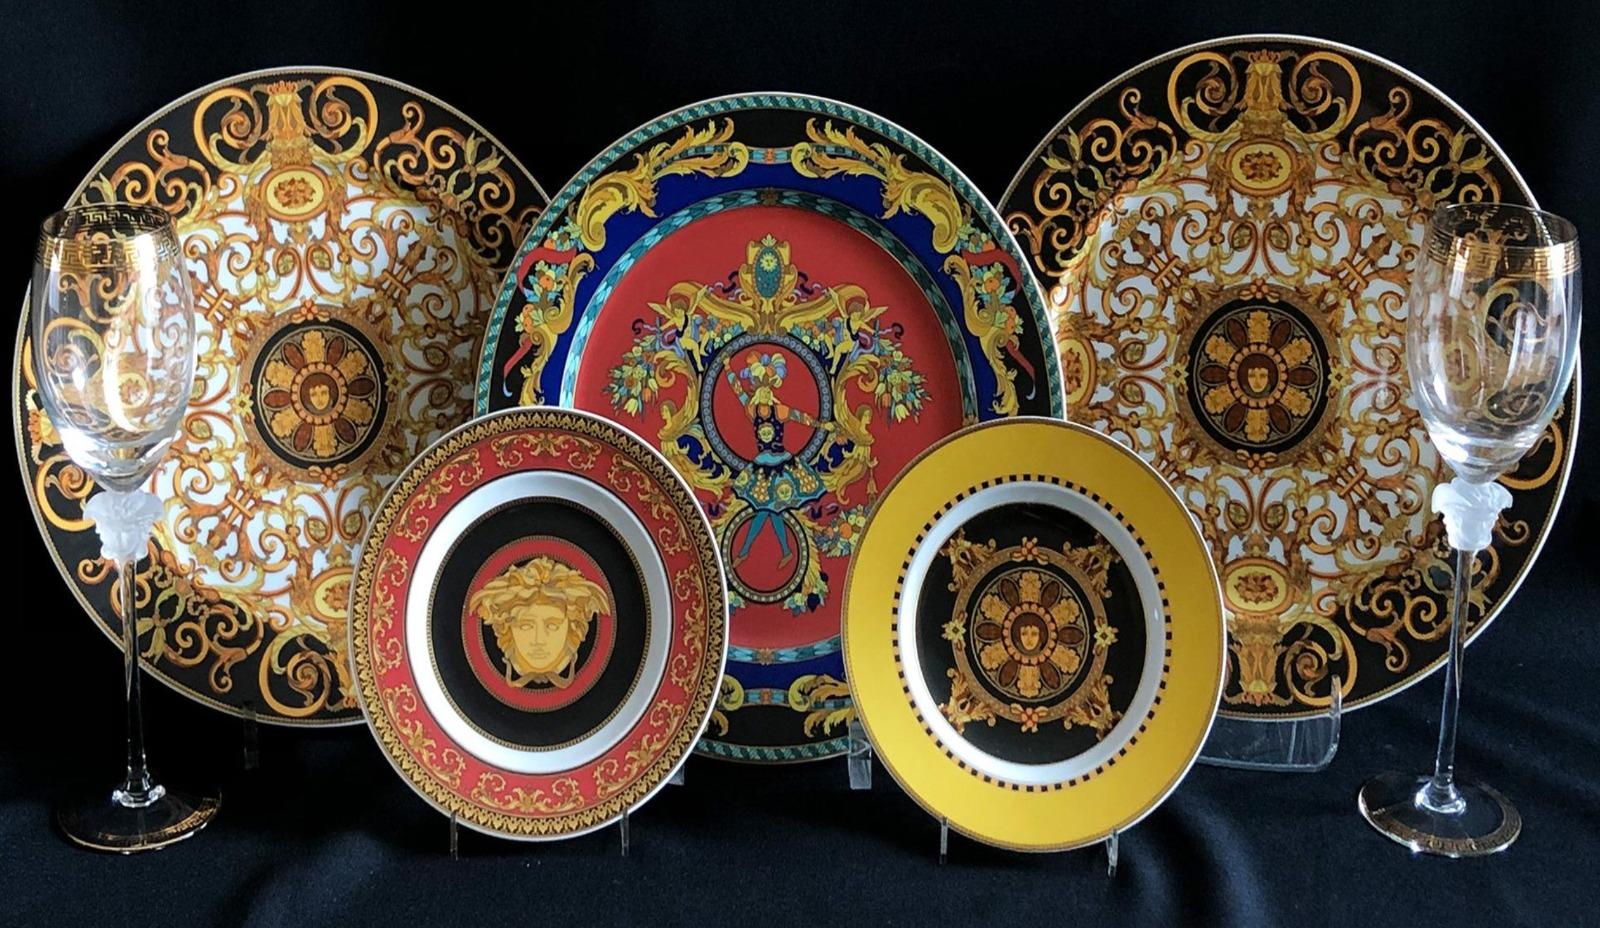 Amazing Gianni Versace Set by Rosenthal 
Rosenthal, designed by Gianni Versace, 
3 large and 2 small plates: Barocco, Le Roi Soleil, Medusa, porcelain, 
D. 18.5 and 31 cm; and 2 champagne flutes with Medusa heads and meanders in gold, H. 27